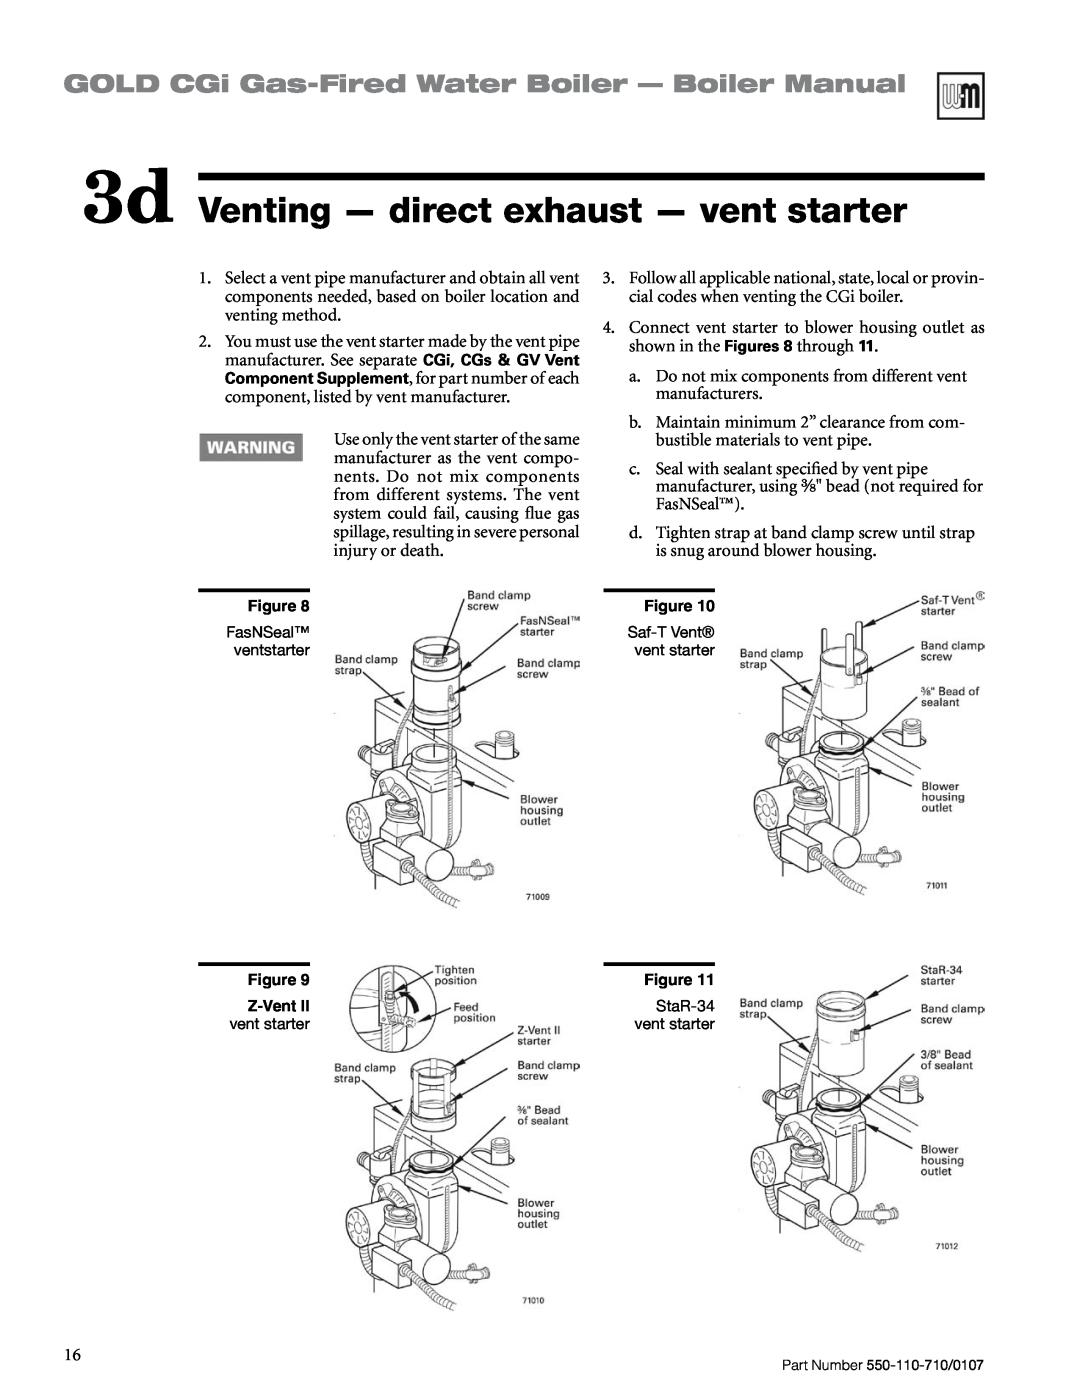 Weil-McLain Series 2 manual 3d Venting - direct exhaust - vent starter, GOLD CGi Gas-FiredWater Boiler — Boiler Manual 